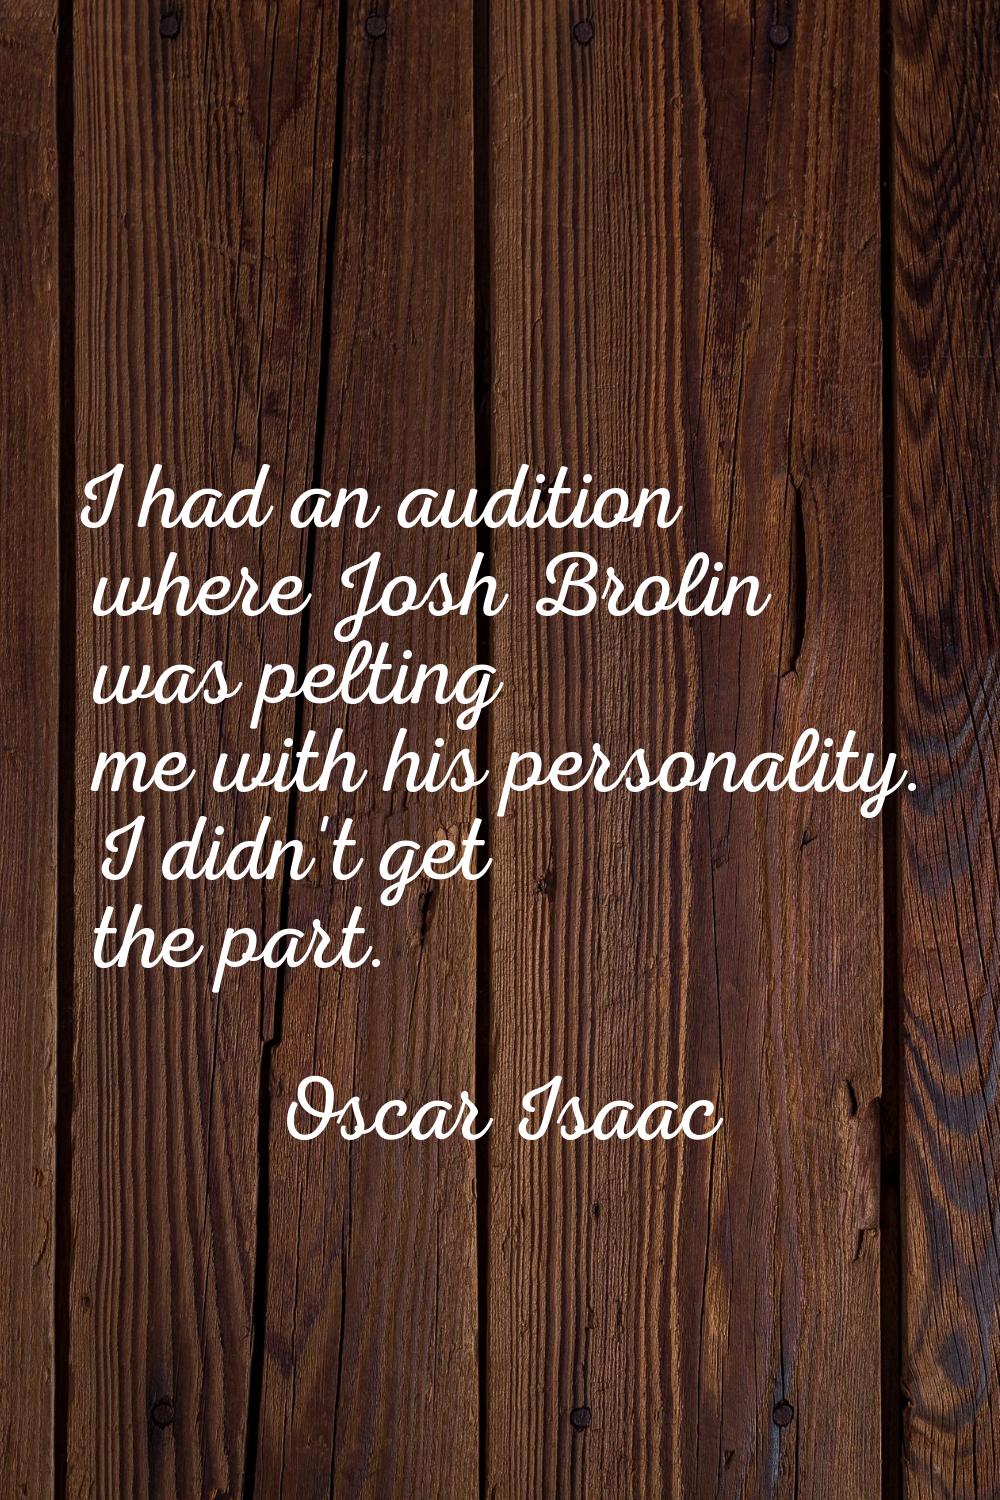 I had an audition where Josh Brolin was pelting me with his personality. I didn't get the part.